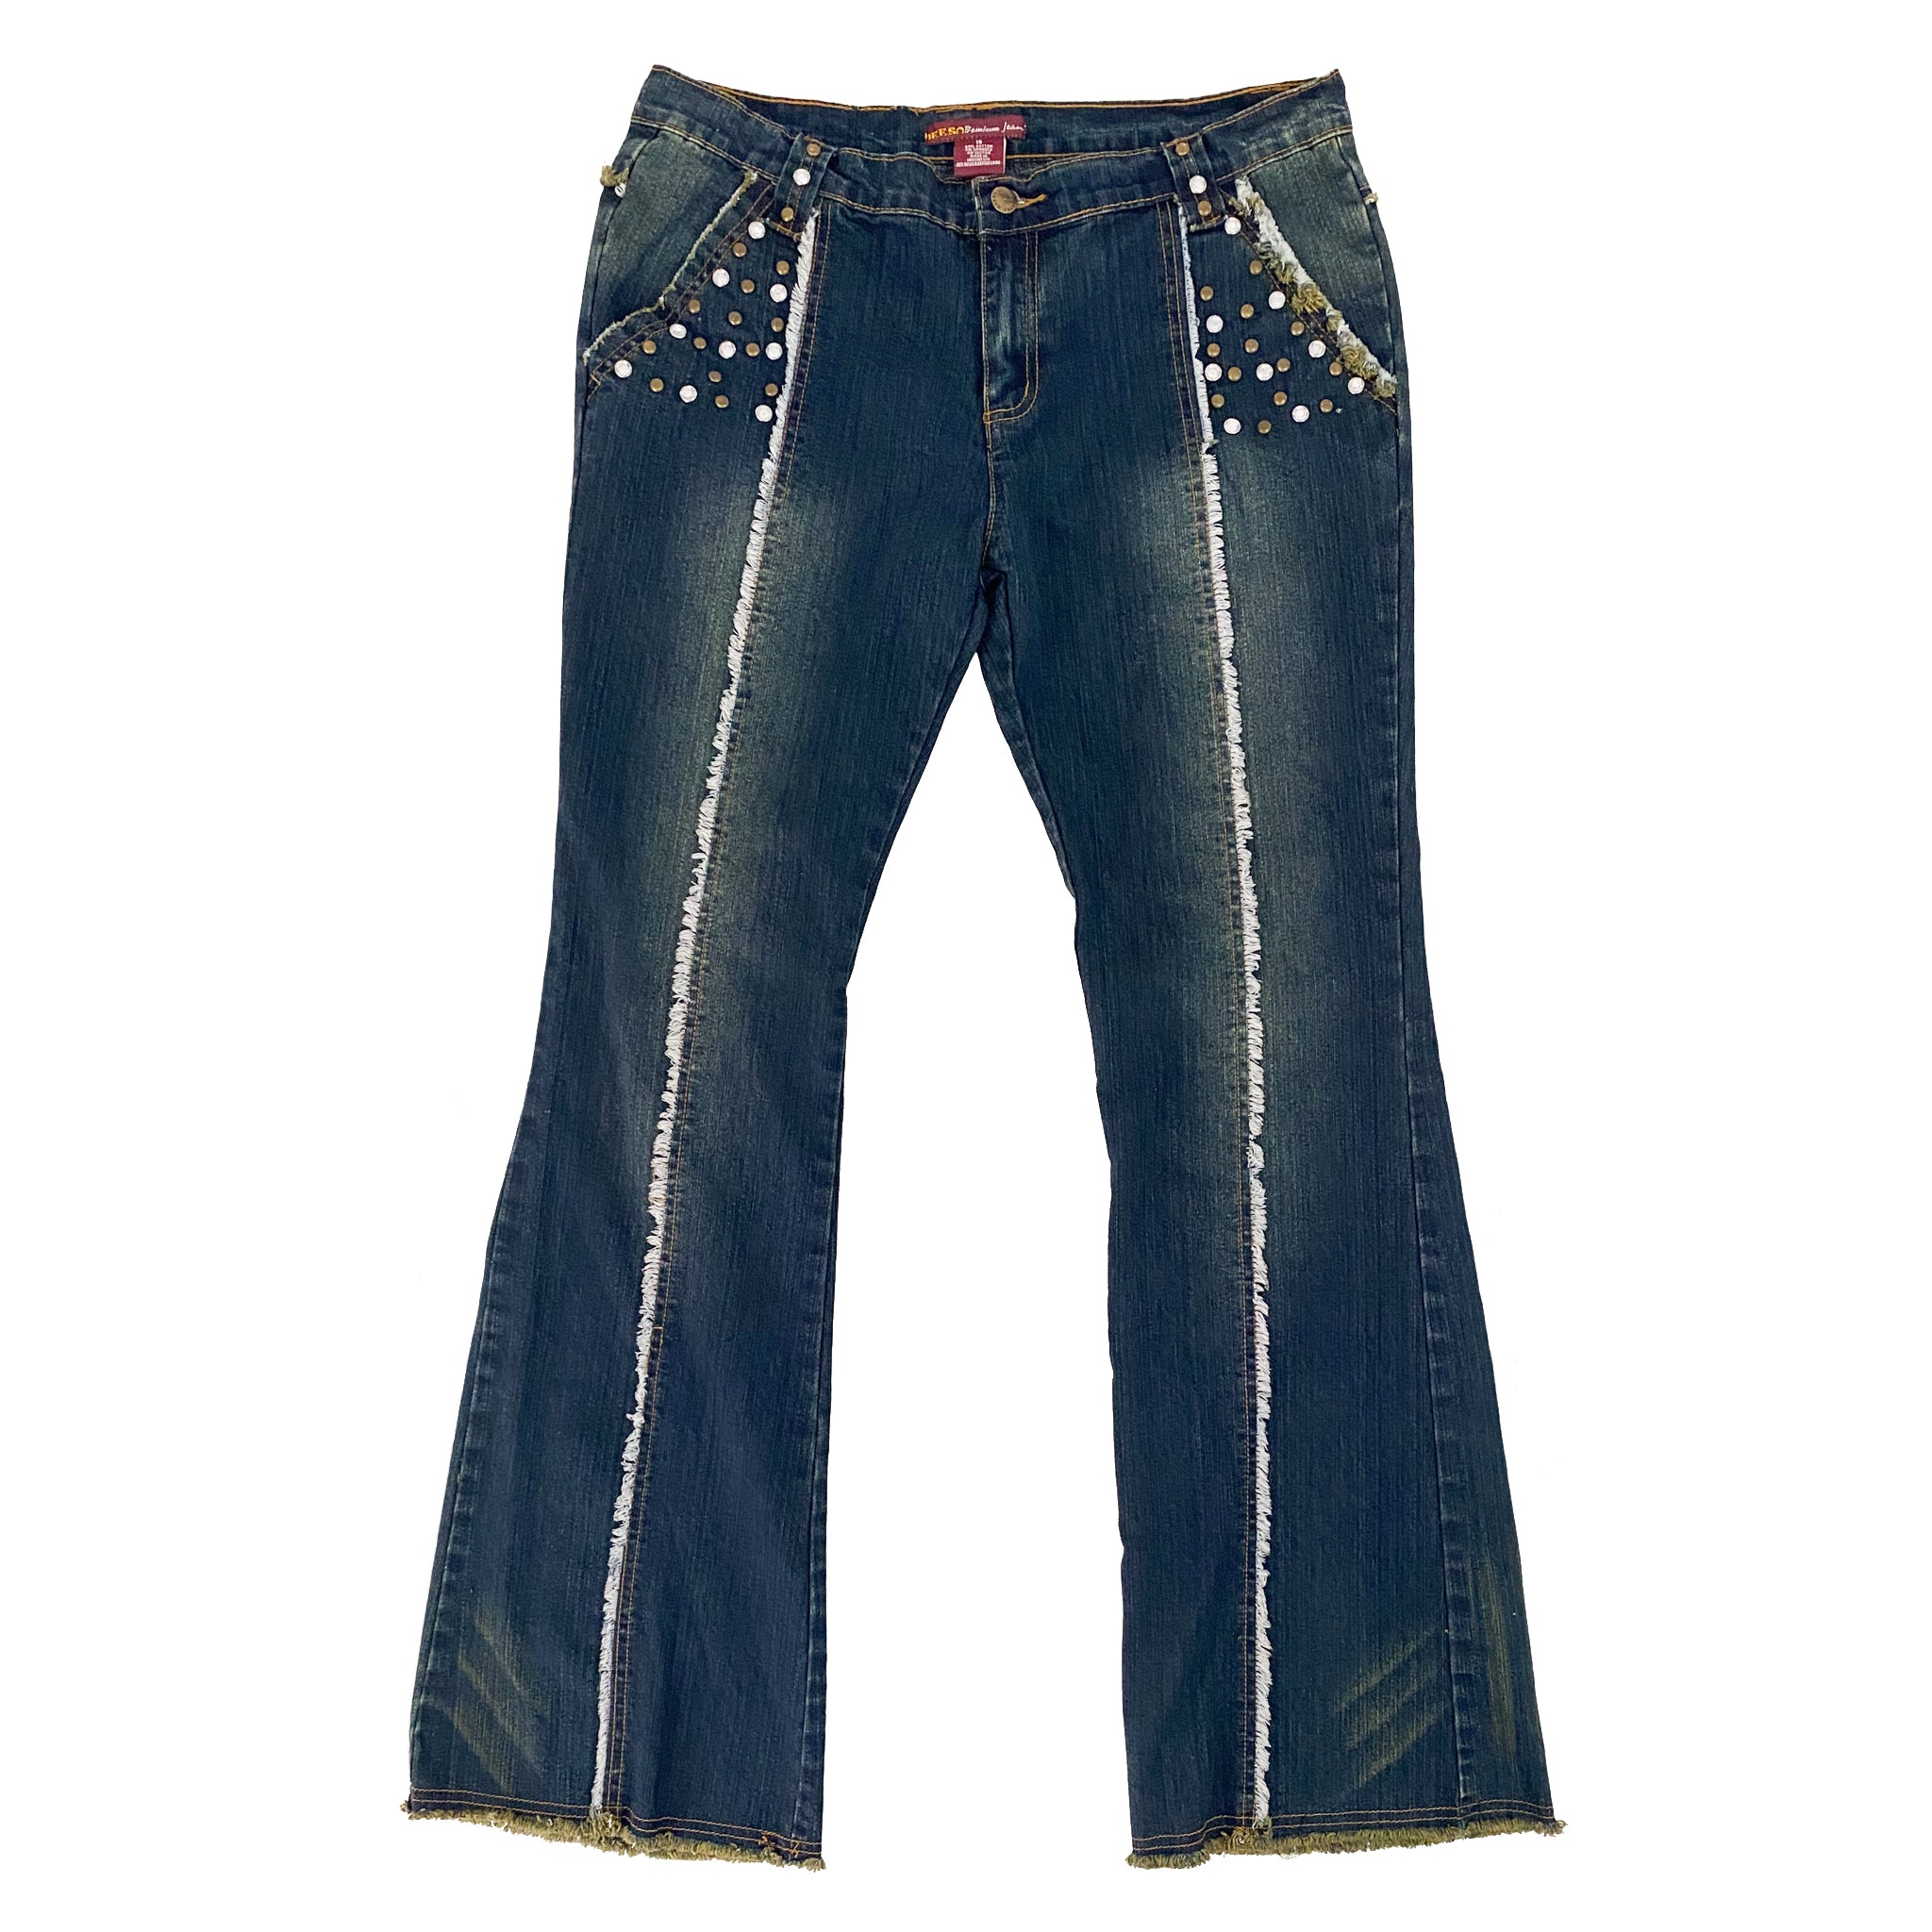 Coyote Ugly Flares (L/XL)